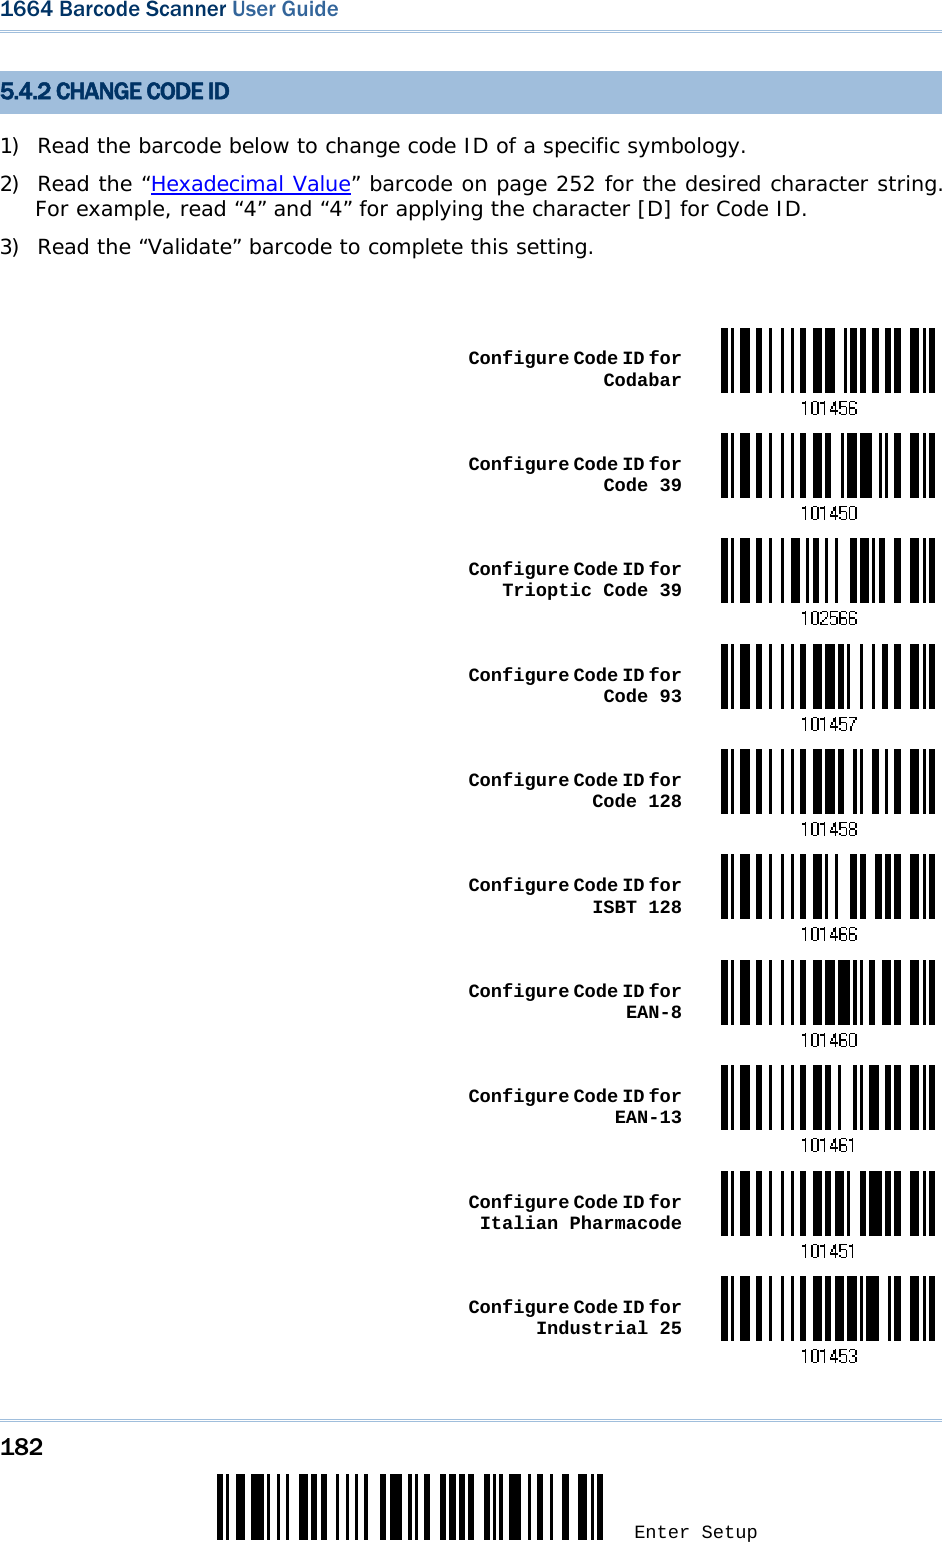 182 Enter Setup 1664 Barcode Scanner User Guide  5.4.2 CHANGE CODE ID 1) Read the barcode below to change code ID of a specific symbology. 2) Read the “Hexadecimal Value” barcode on page 252 for the desired character string. For example, read “4” and “4” for applying the character [D] for Code ID. 3) Read the “Validate” barcode to complete this setting.   Configure Code ID for Codabar Configure Code ID for Code 39 Configure Code ID for Trioptic Code 39 Configure Code ID for Code 93 Configure Code ID for Code 128 Configure Code ID for ISBT 128 Configure Code ID for EAN-8 Configure Code ID for EAN-13 Configure Code ID for Italian Pharmacode Configure Code ID for Industrial 25 